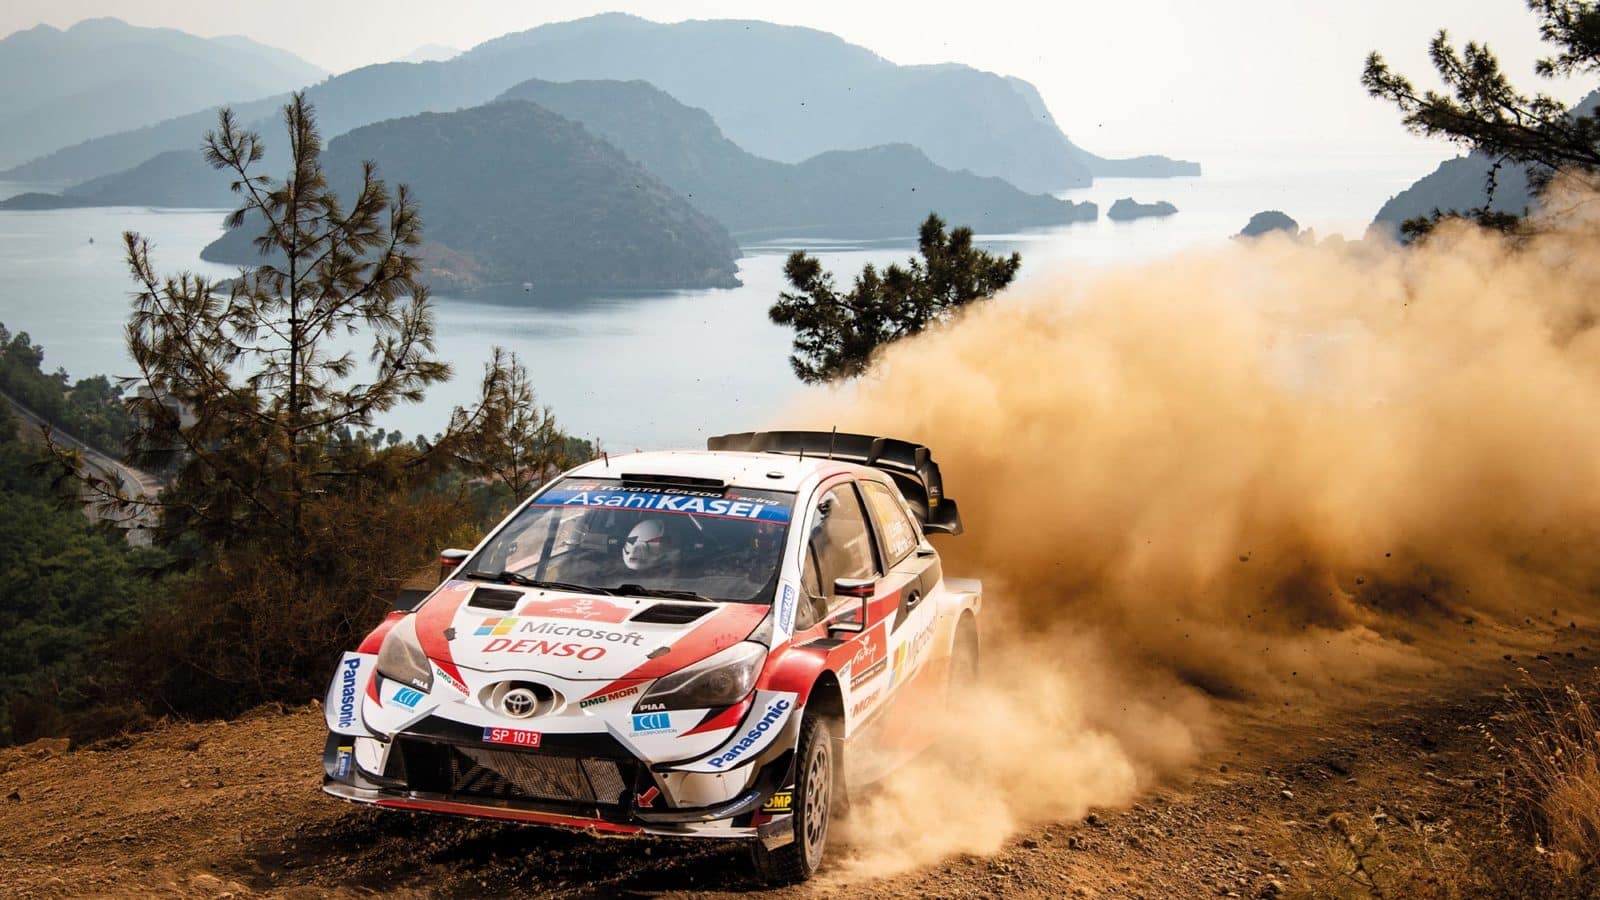 Elfyn Evans heads to victory in his Toyota Yaris on the 2020 WRC Rally Turkey